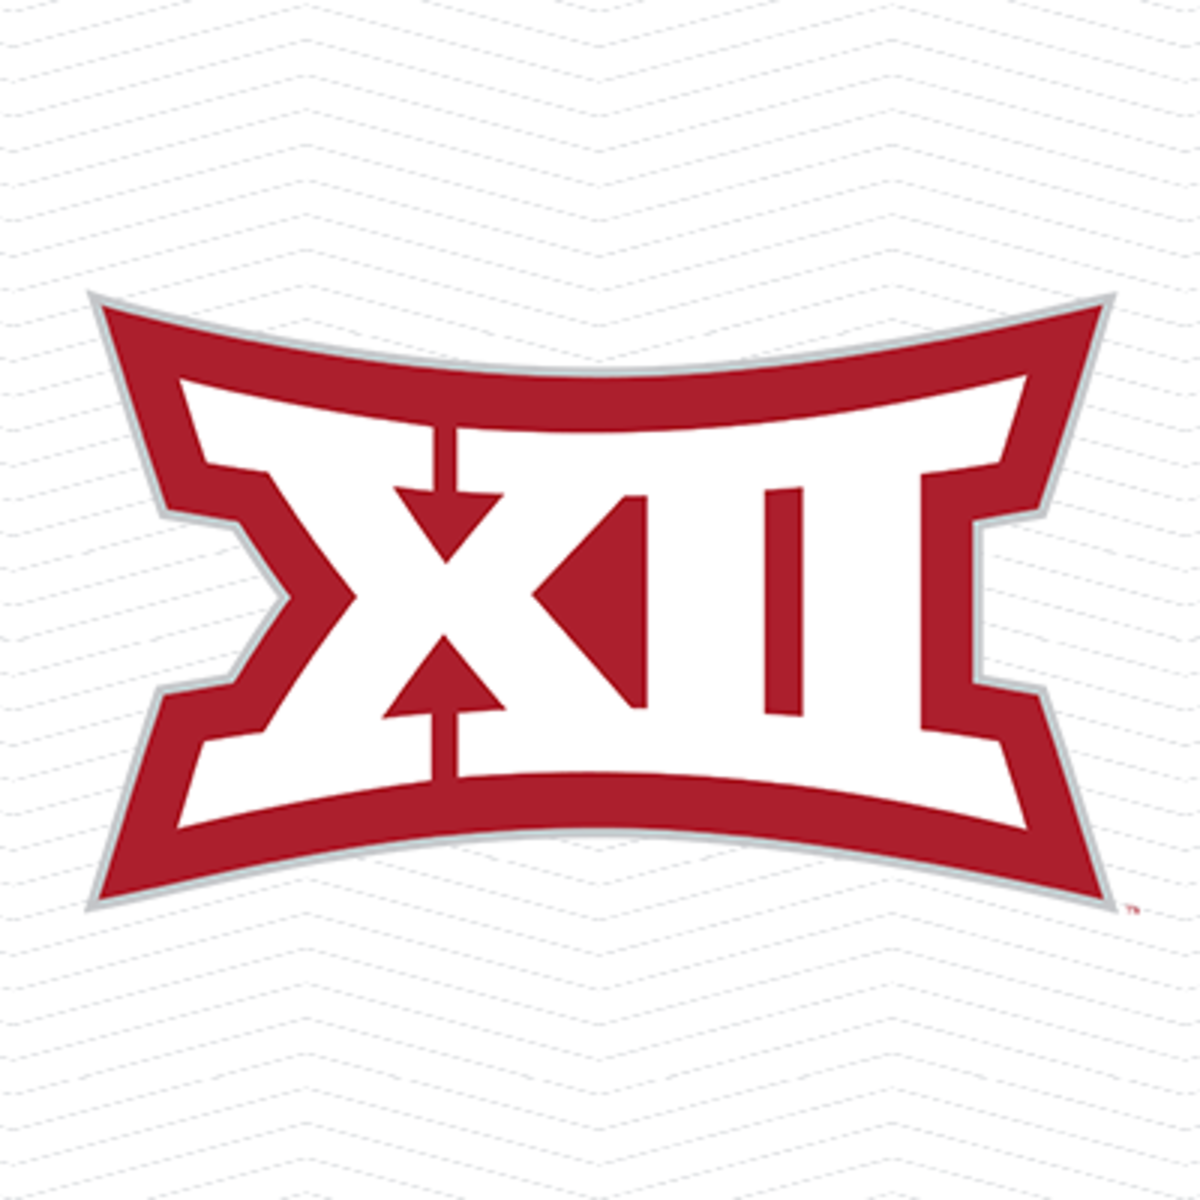 The Big 12 Conference's logo.